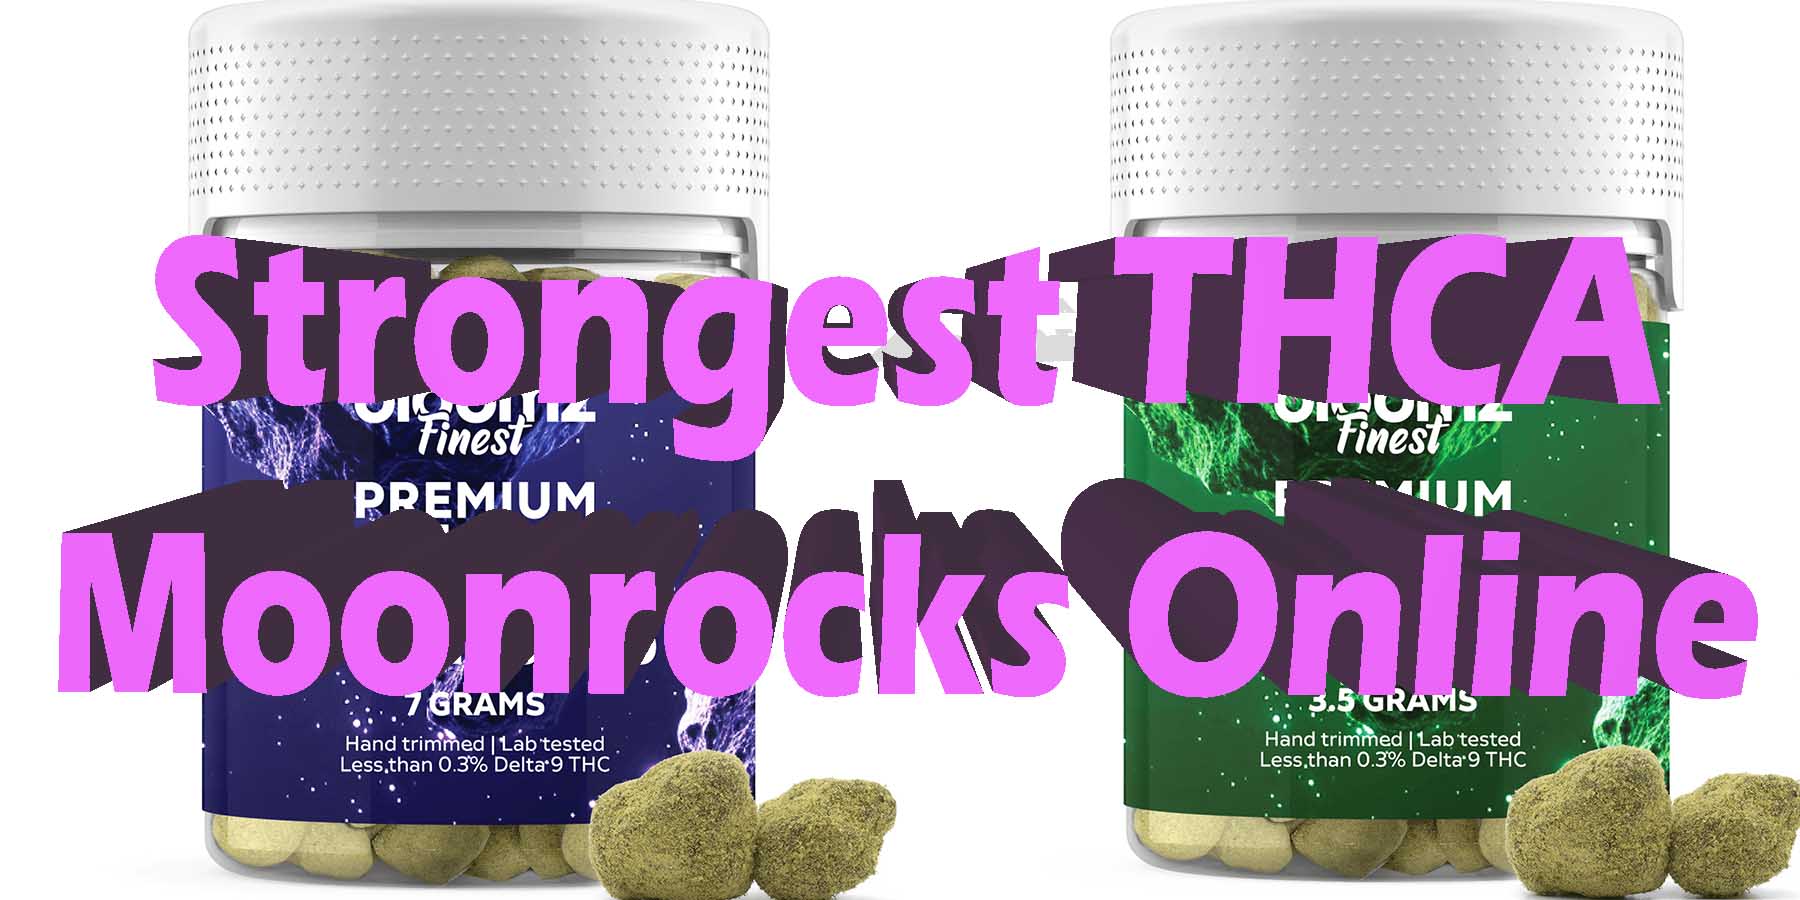 Strongest THCA Moonrocks Online LowestPrice Coupon Discount For Smoking Best High Smoke Shop Online Near Me Bloomz